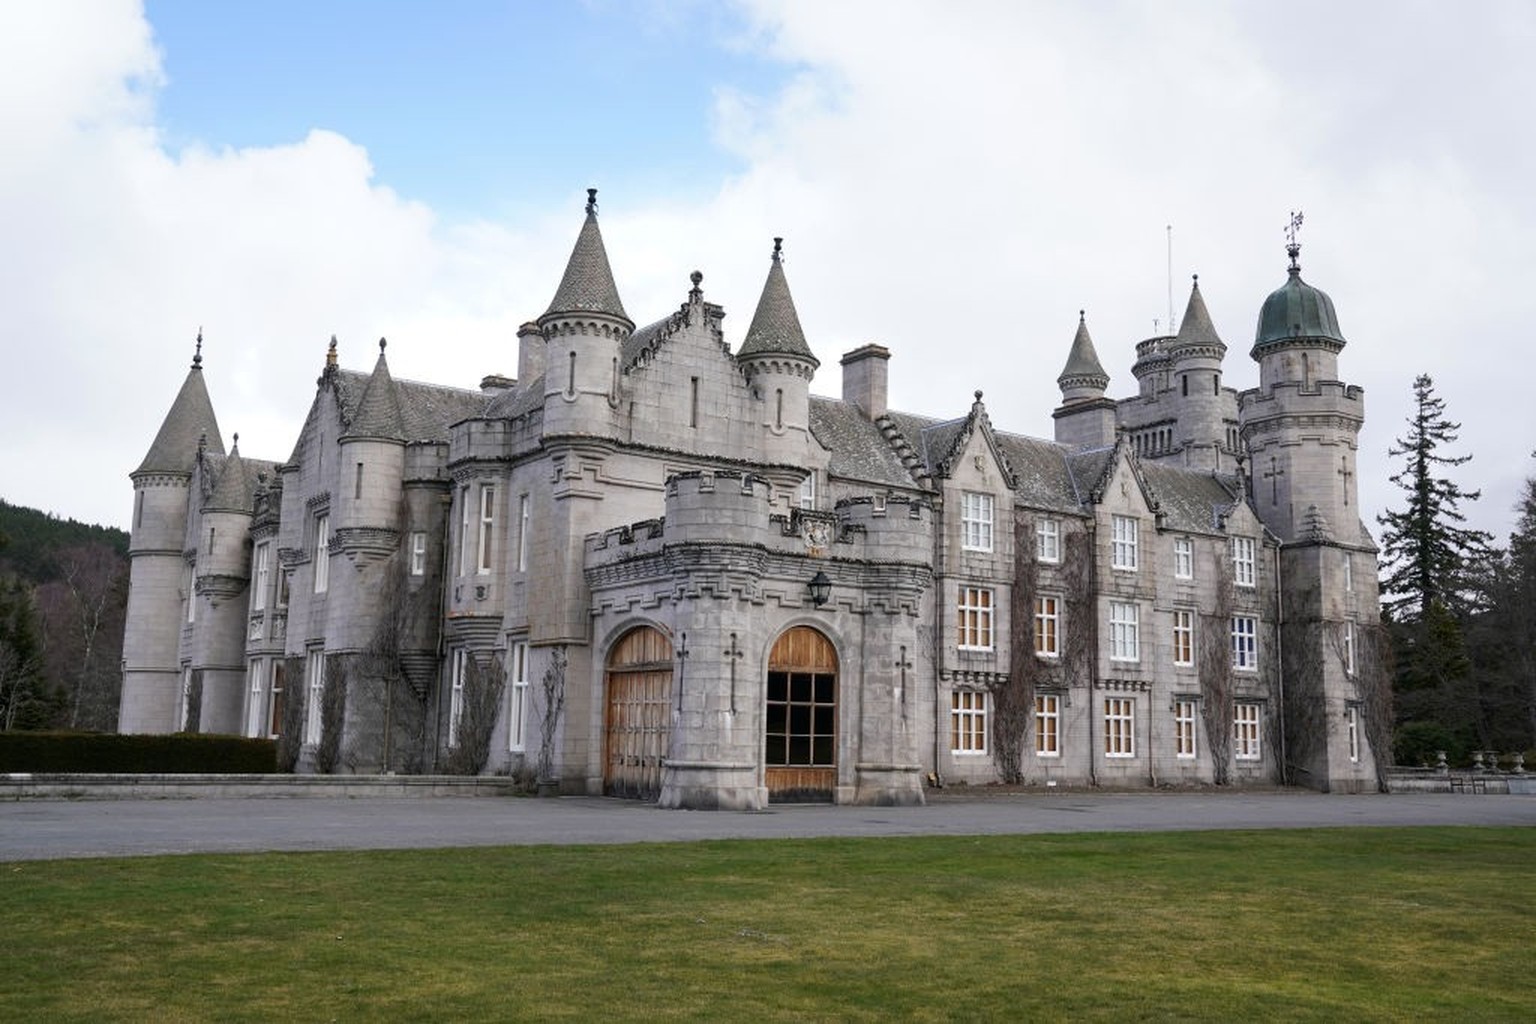 ABERDEEN, SCOTLAND - MARCH 30: A general view of the Castle during the opening of &quot;Life At Balmoral&quot; -The Platinum Jubilee Exhibition at Balmoral Castle on March 30, 2022 in Aberdeen, Scotla ...